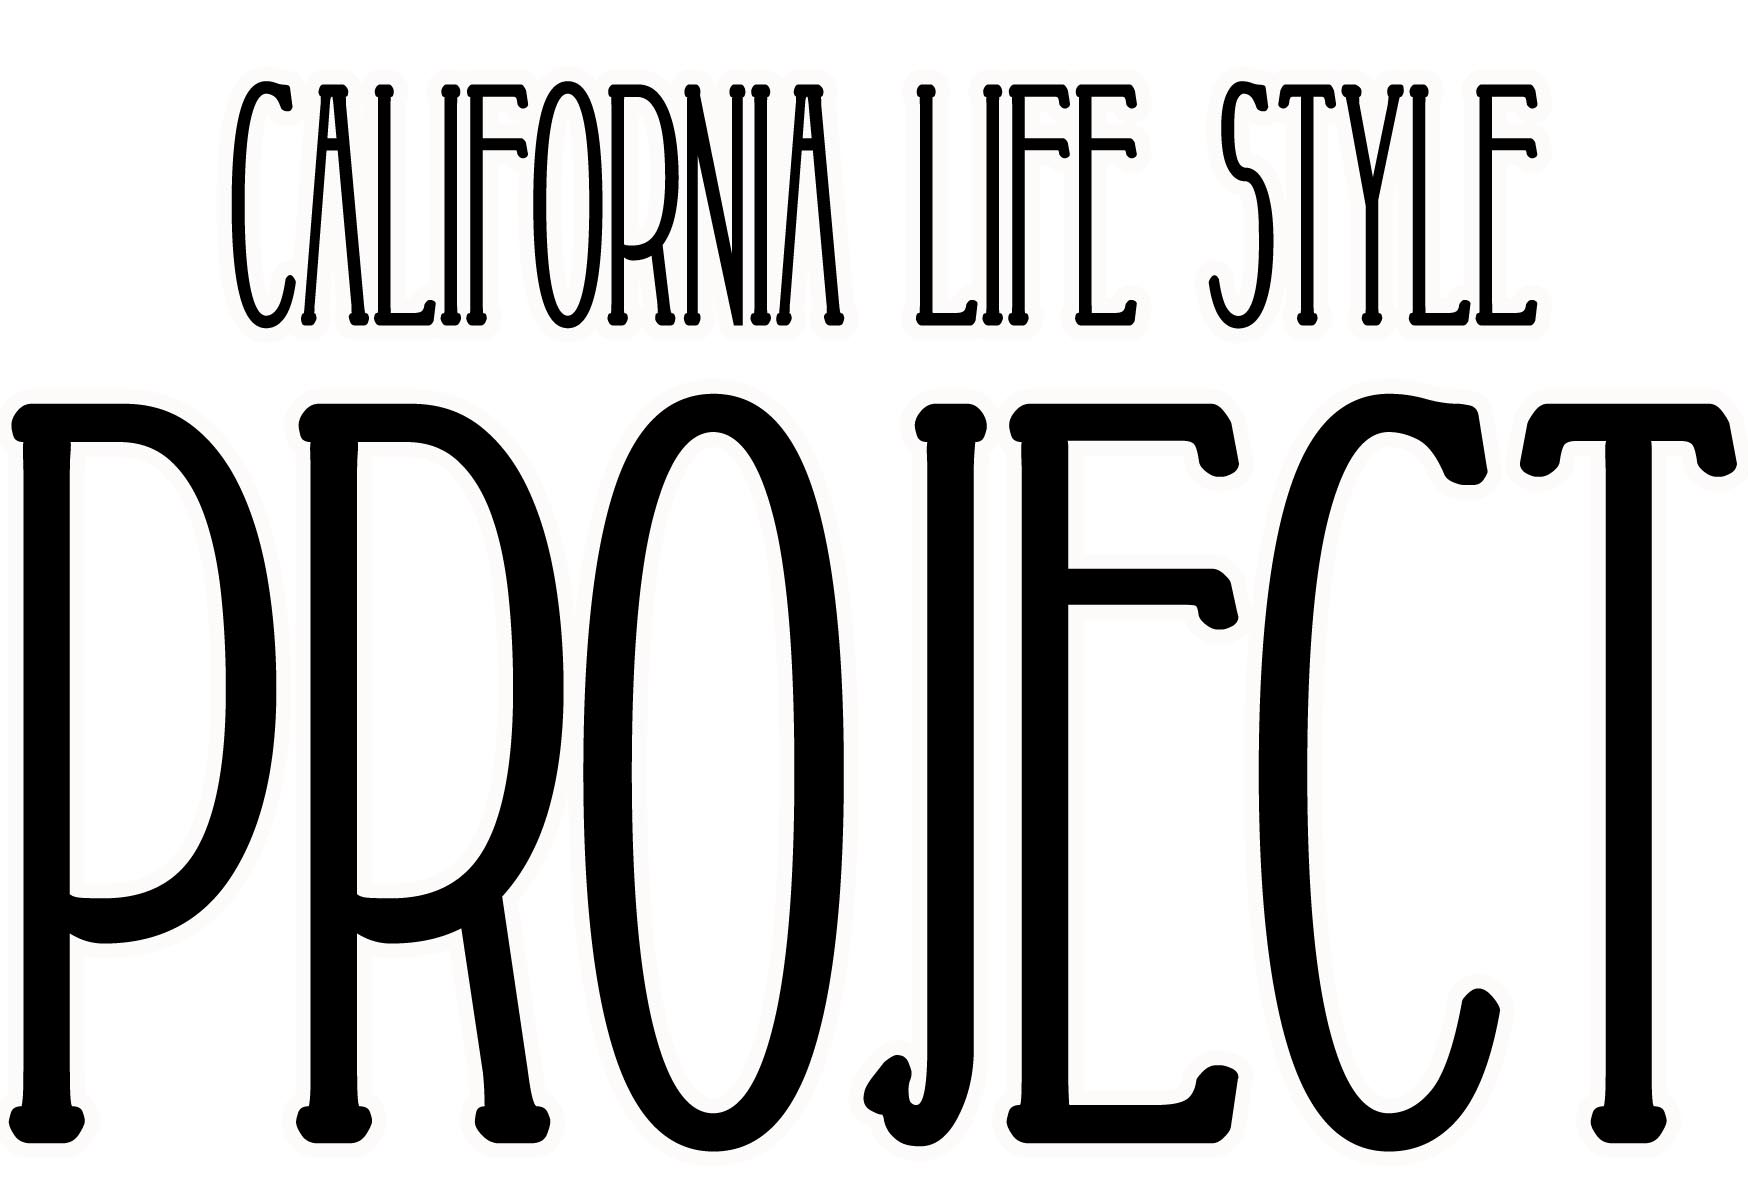 CALIFORNIA LIFE STYLE PROJECT